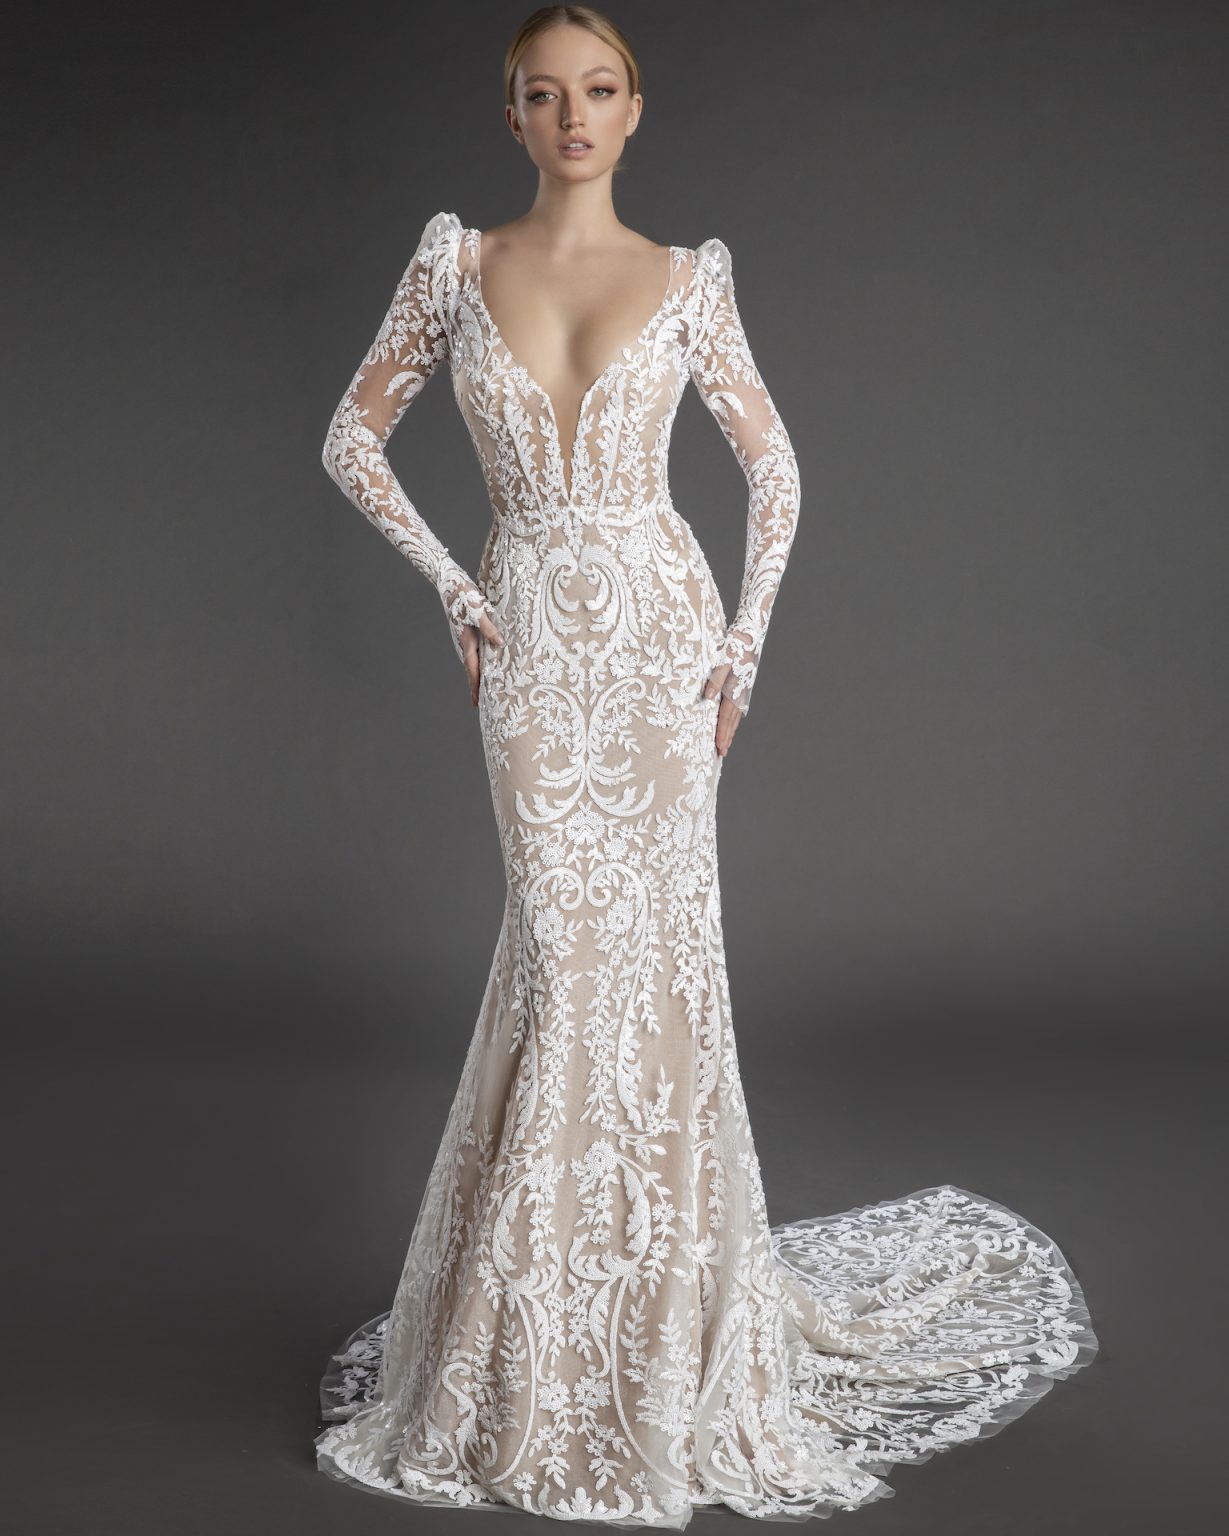 All Over Lace Long Puff Sleeve Sheath Wedding Dress With Plunging V Neckline Kleinfeld Bridal 4148